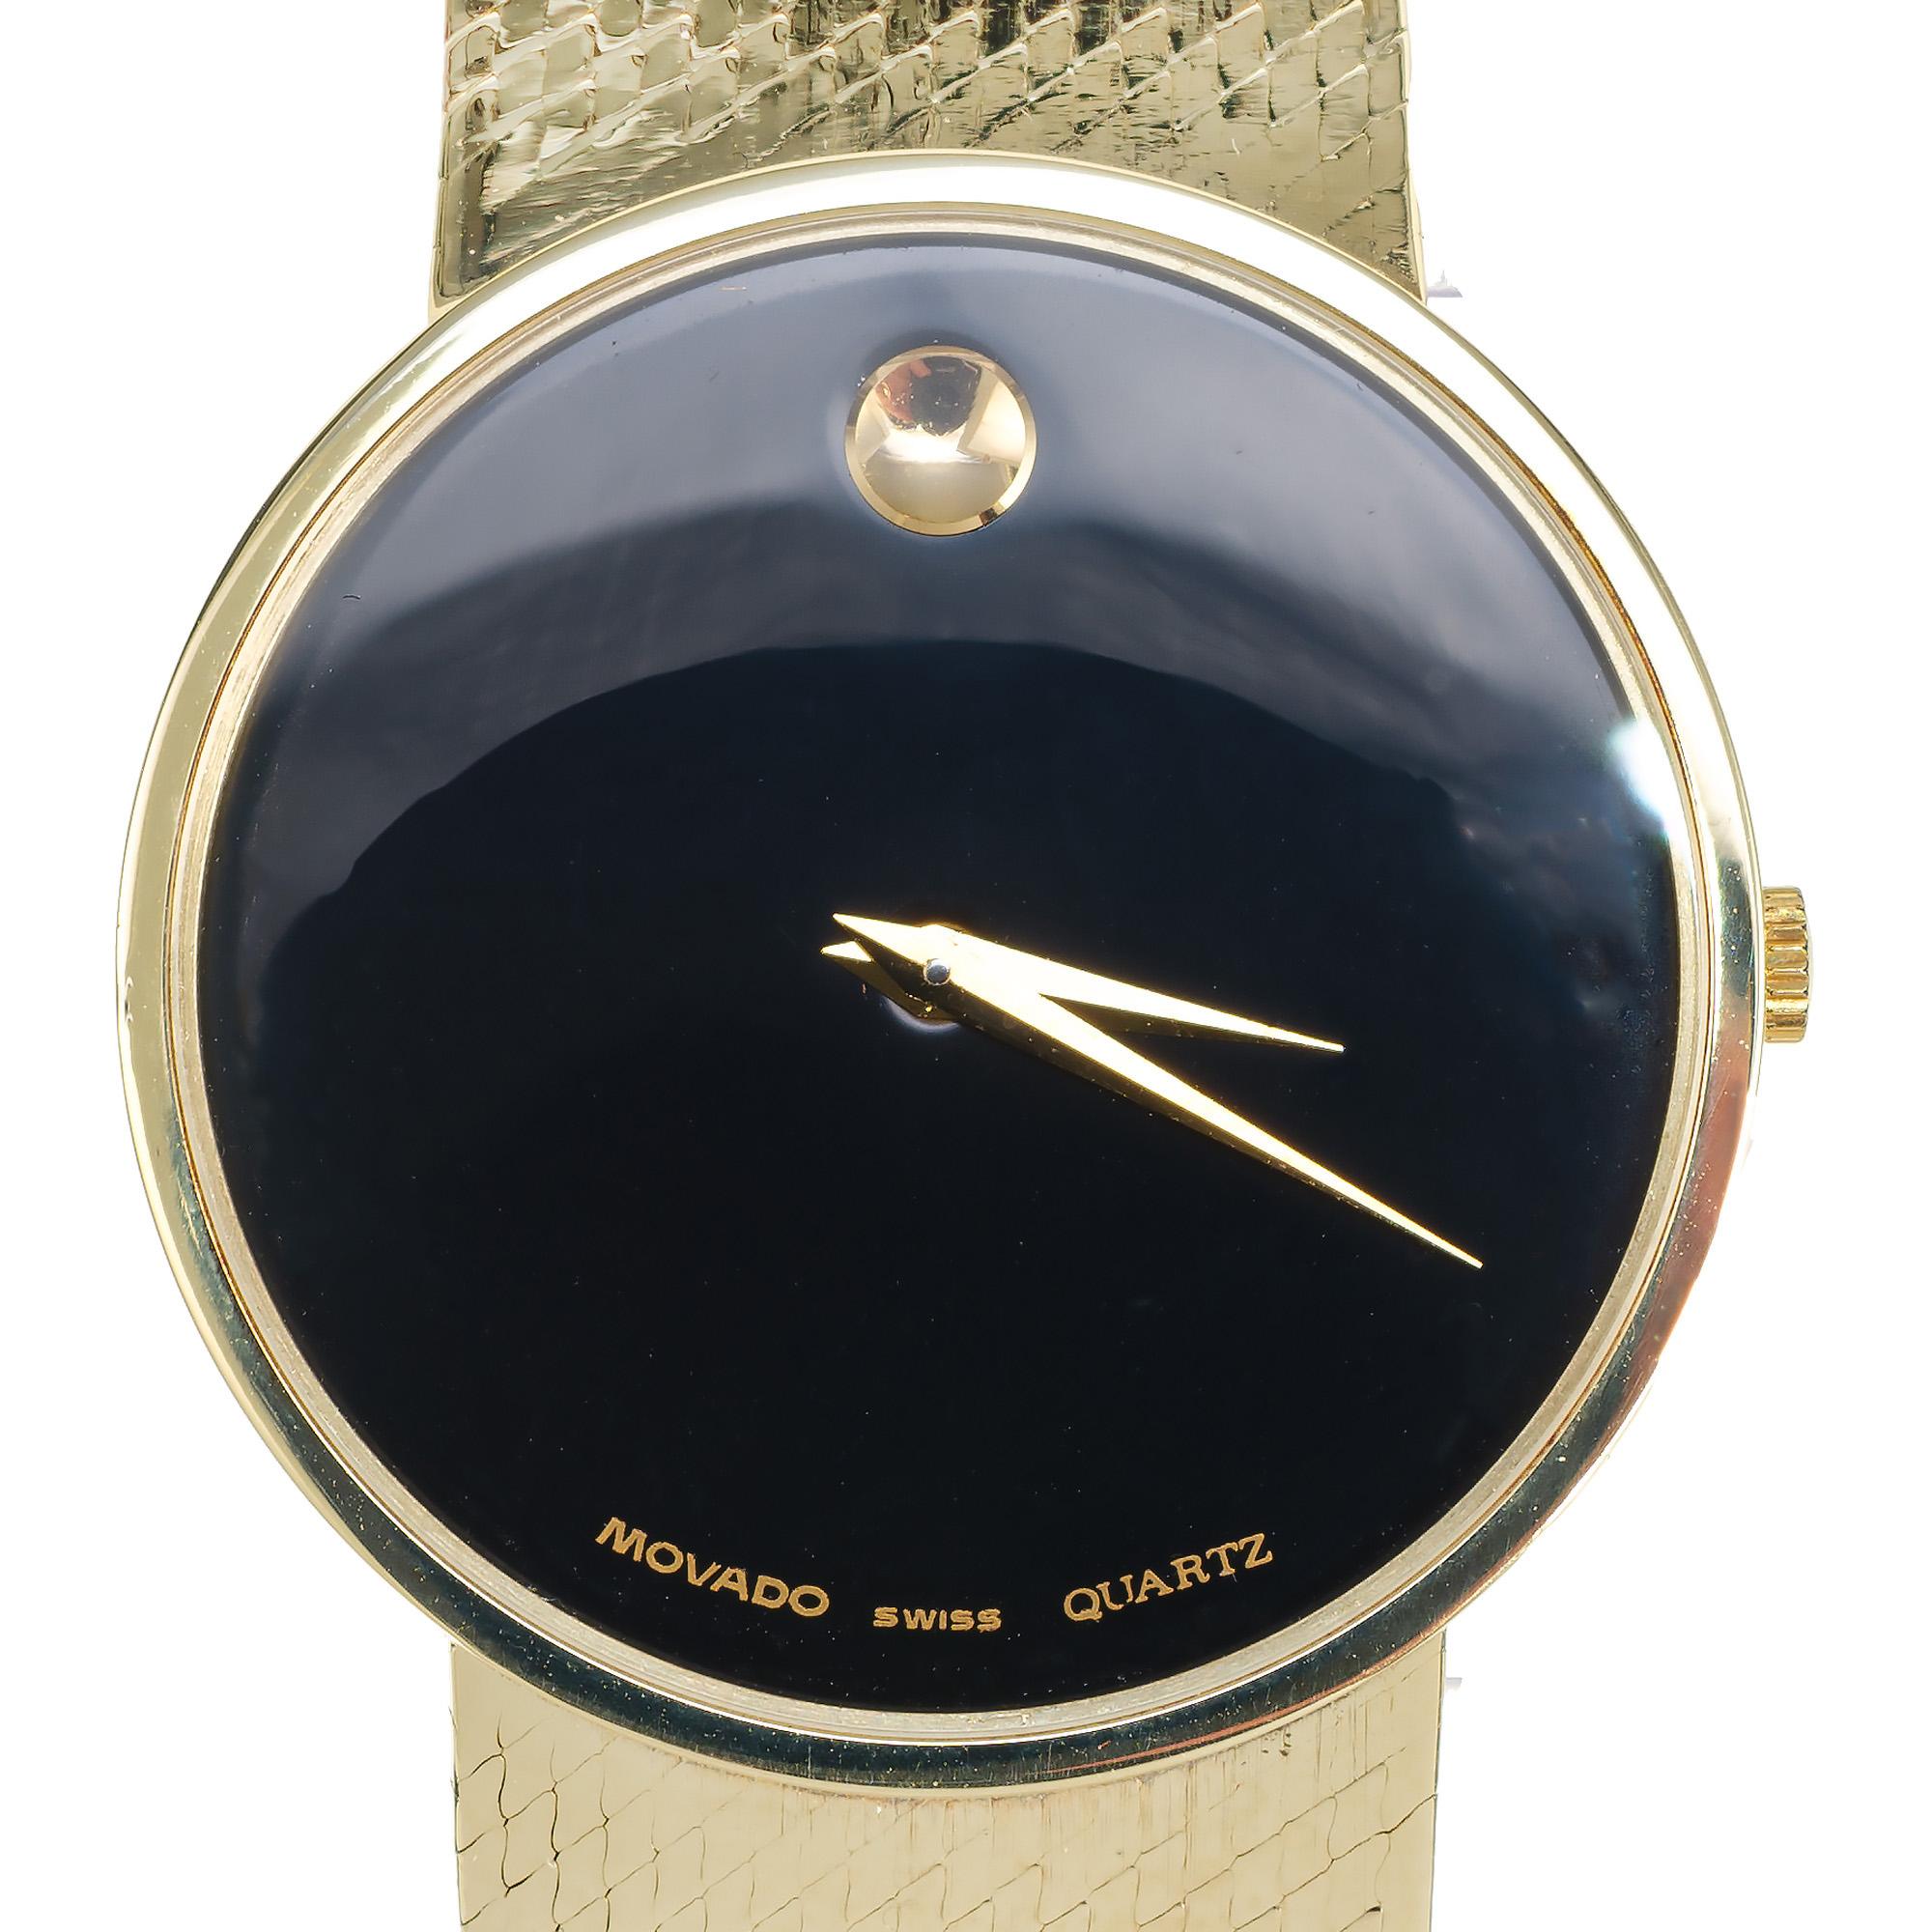 Restored 30mm unisex solid 14k 1990's Movado museum watch, all original with 14k mesh band. No repairs or defects. Comes with a one year service warranty. 

Length: 30.23mm
Width: 30.23mm
Band width at case: 18mm
Case thickness: 4.43mm
Band: 14k